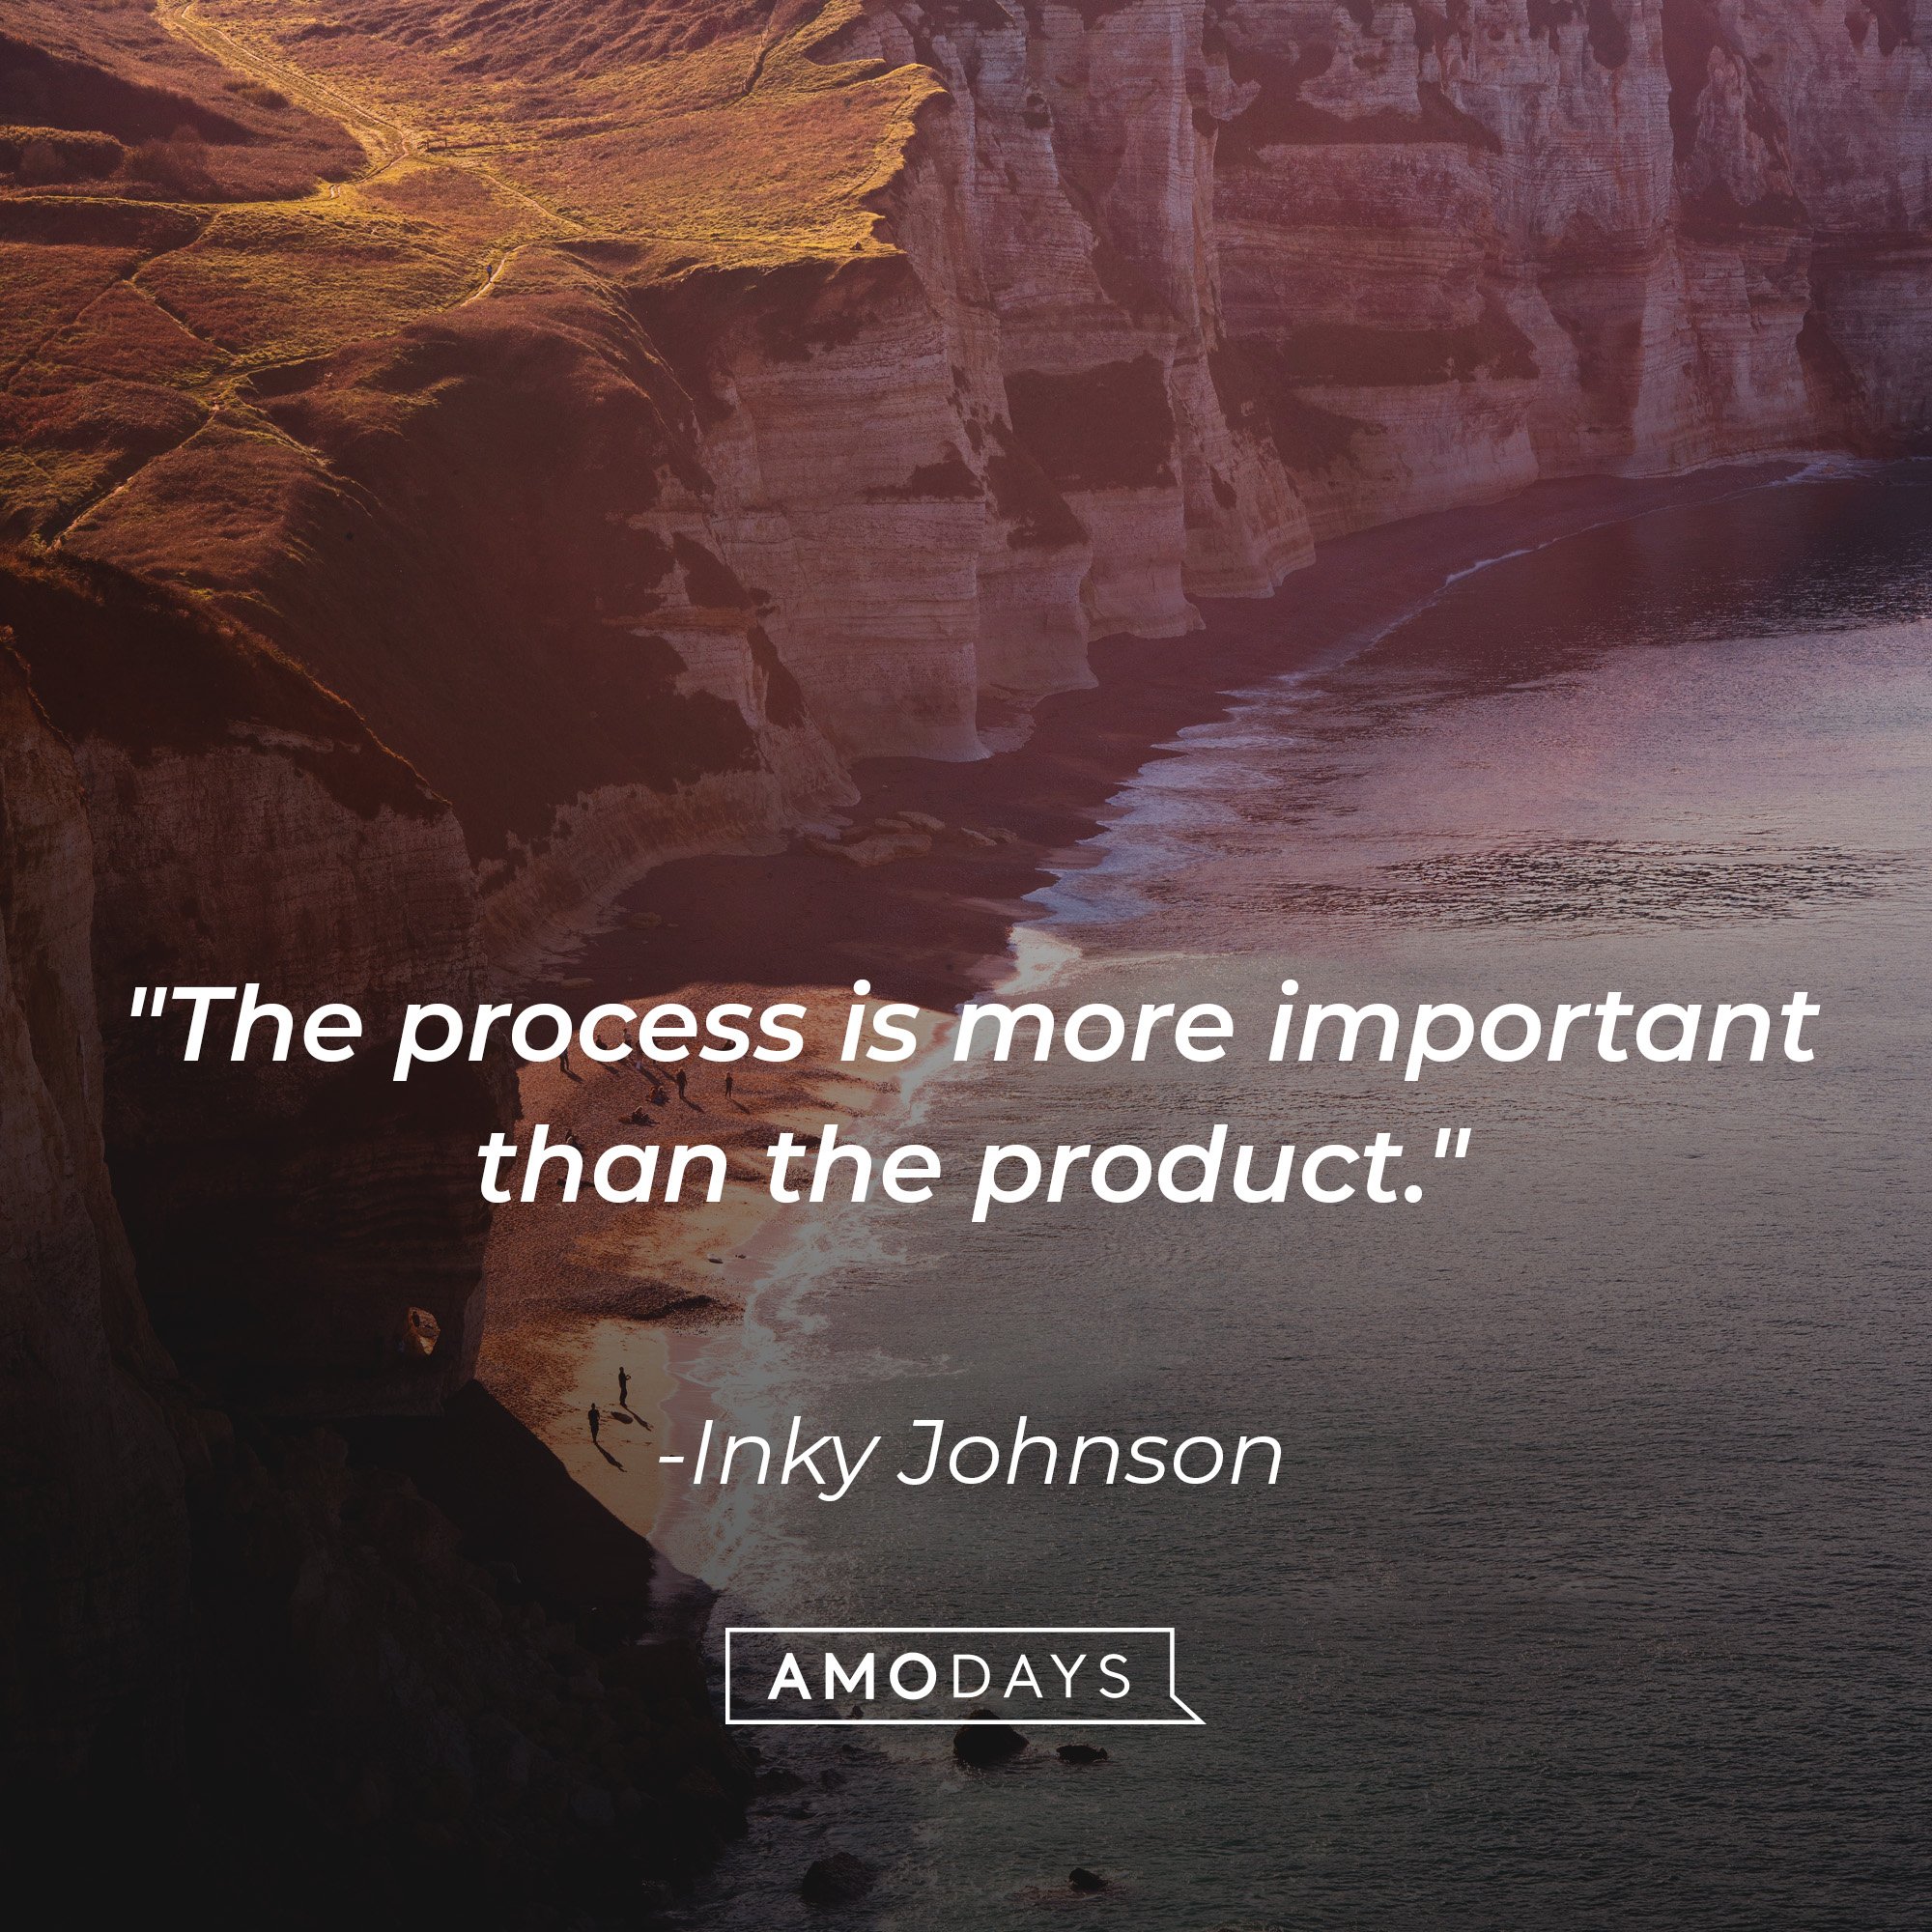 Inky Johnson's quote: "The process is more important than the product."  | Image: AmoDays